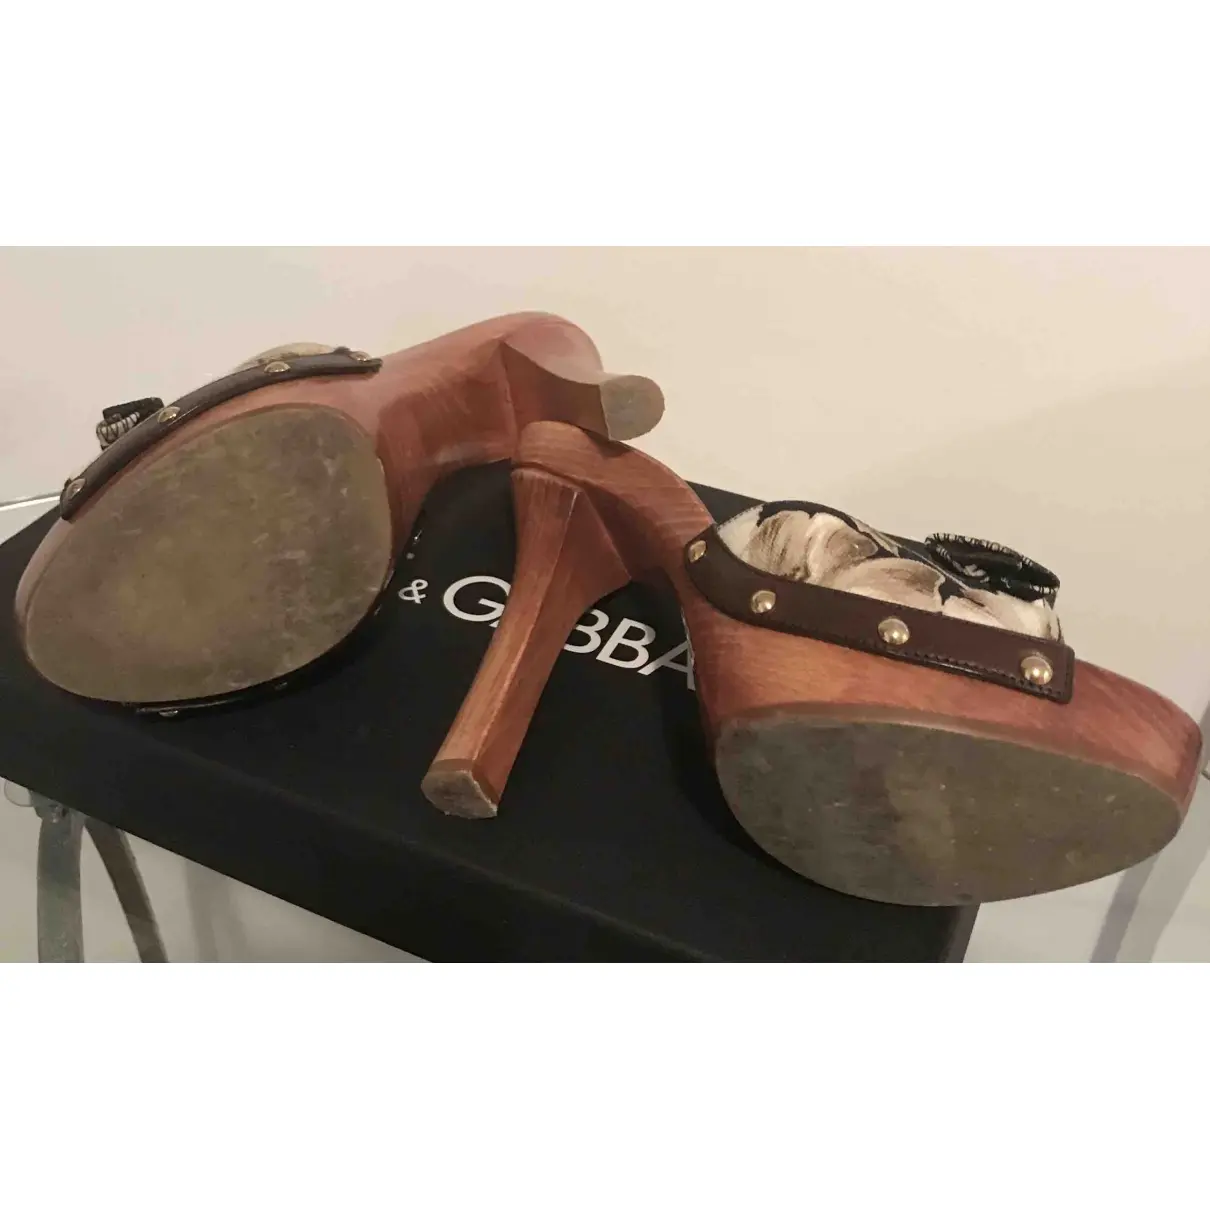 Buy Dolce & Gabbana Cloth mules & clogs online